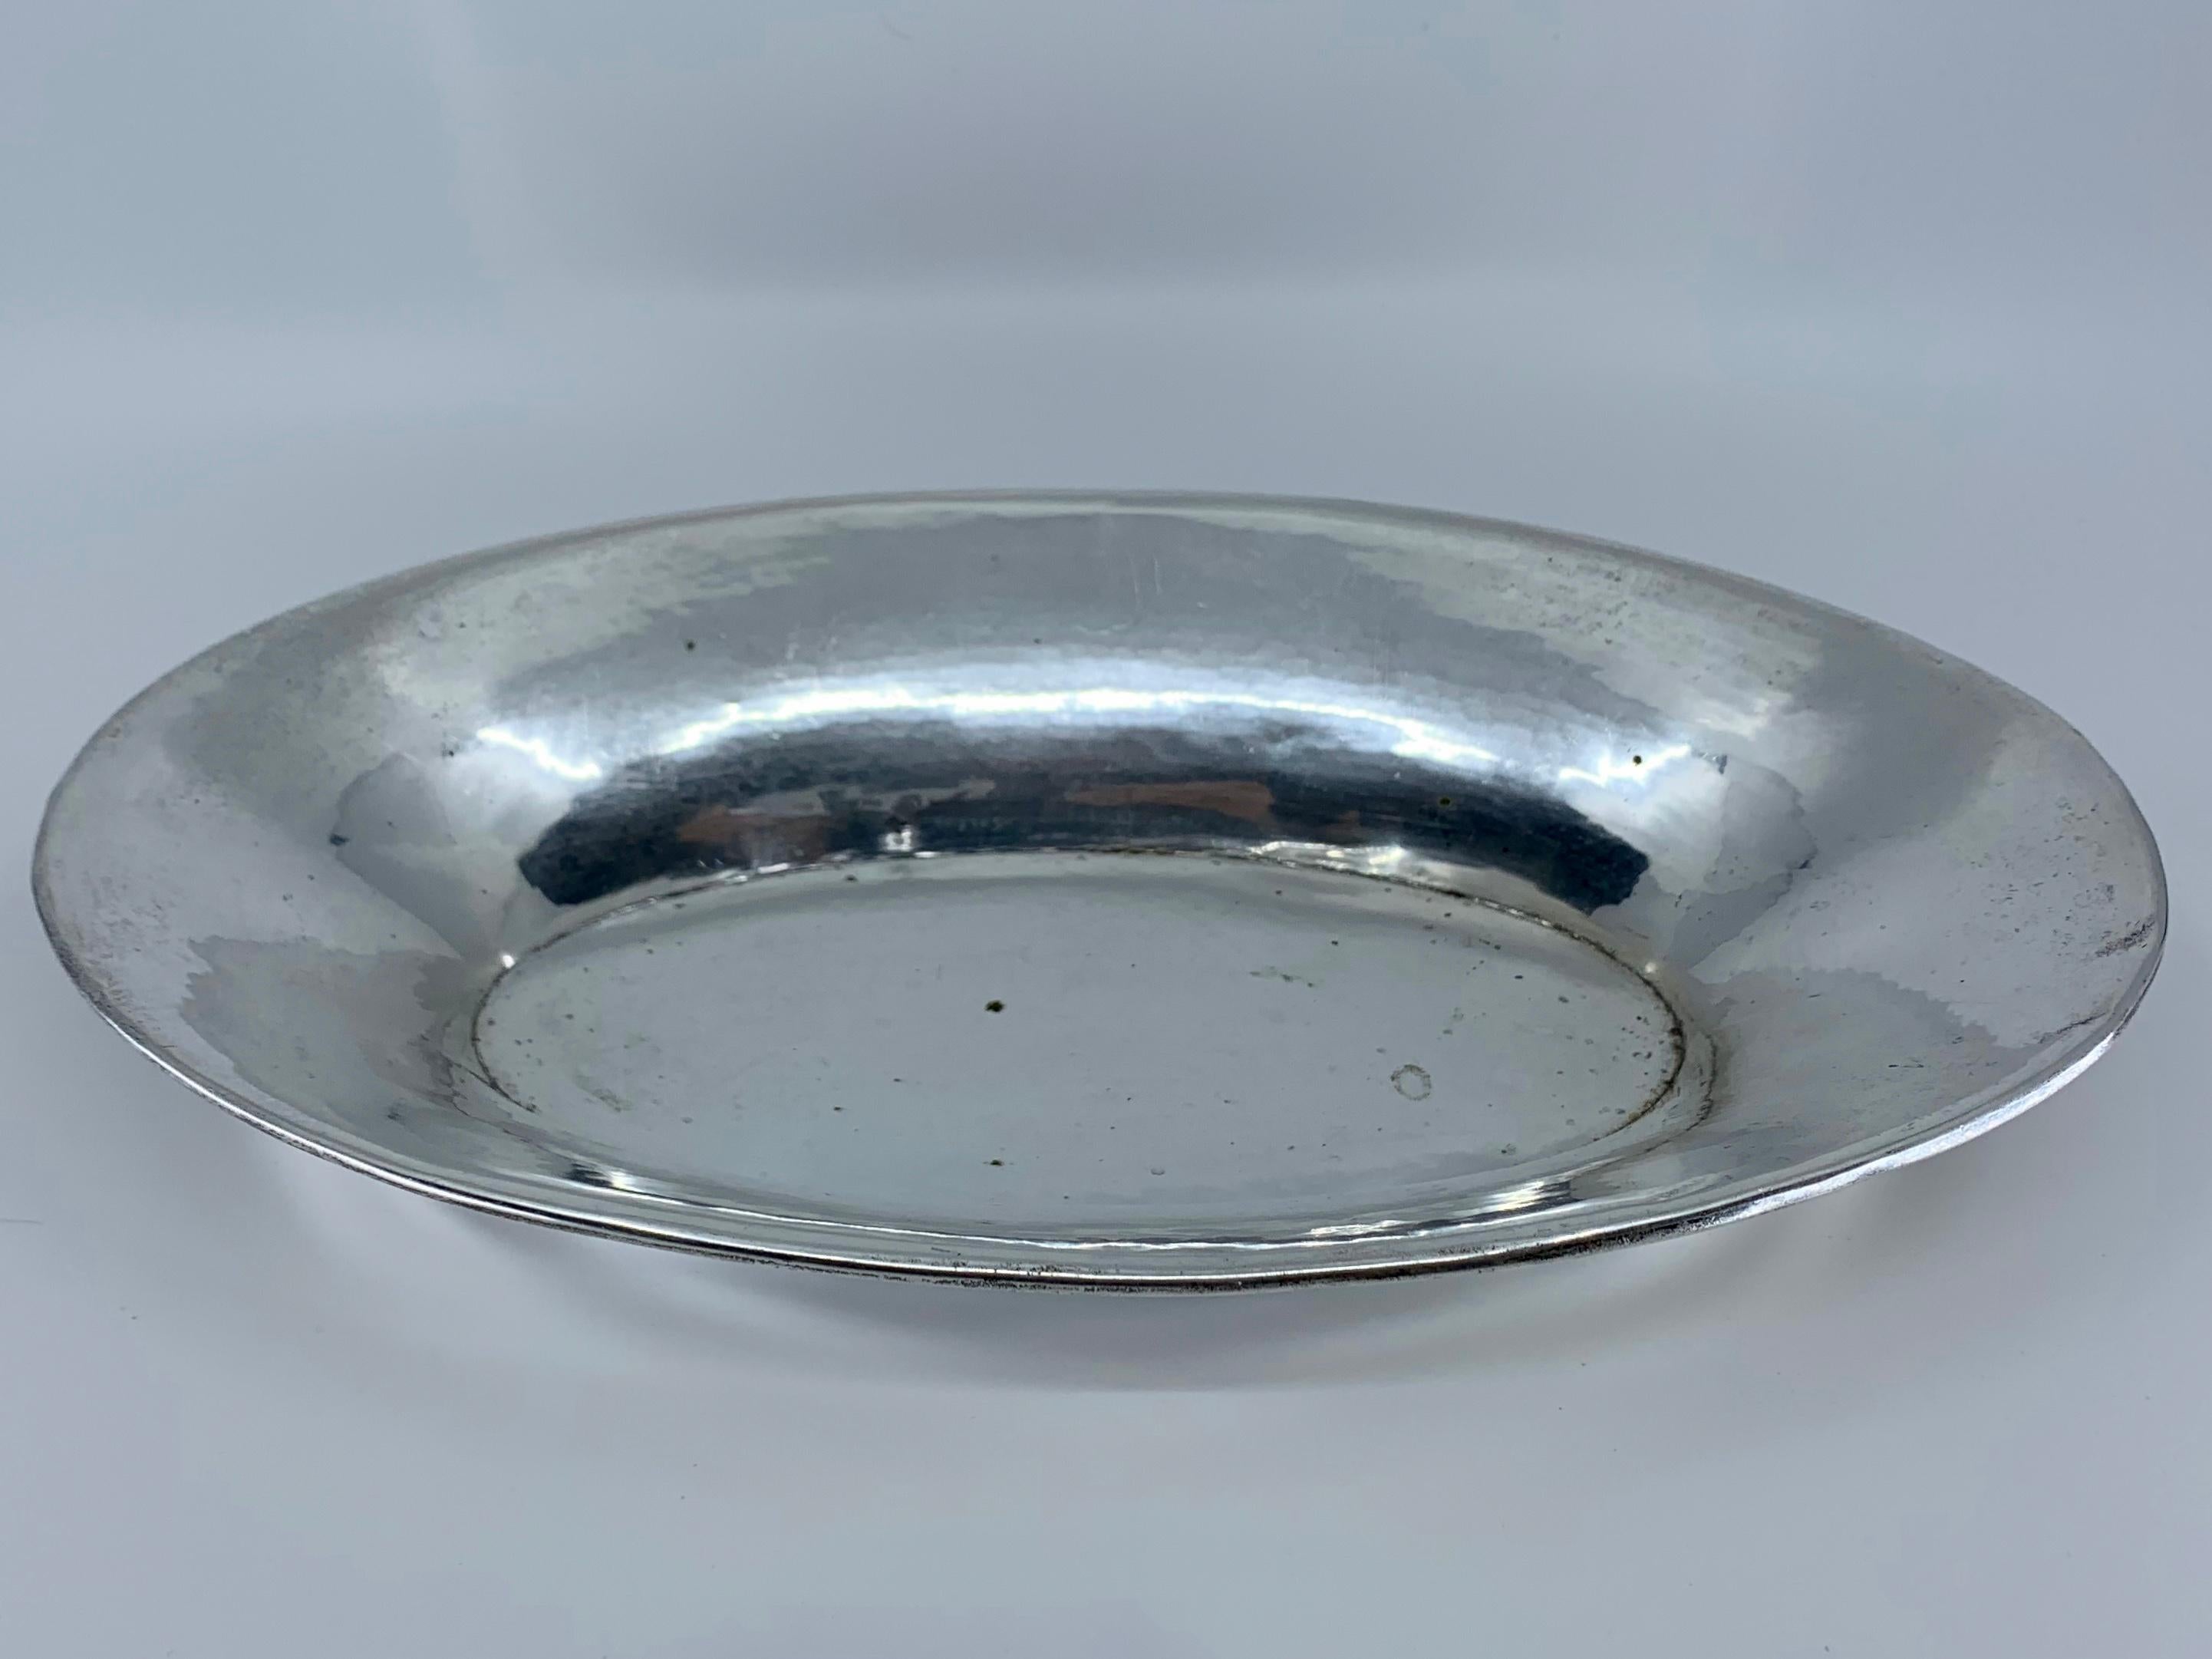 Italian sterling bread plate. Vintage oval sterling silver shallow bread dish with outward curving rim of sleek and simple design; a chic bread plate, potpourri dish or table accessory, Italy, mid-20th century.
Dimensions: 10.5